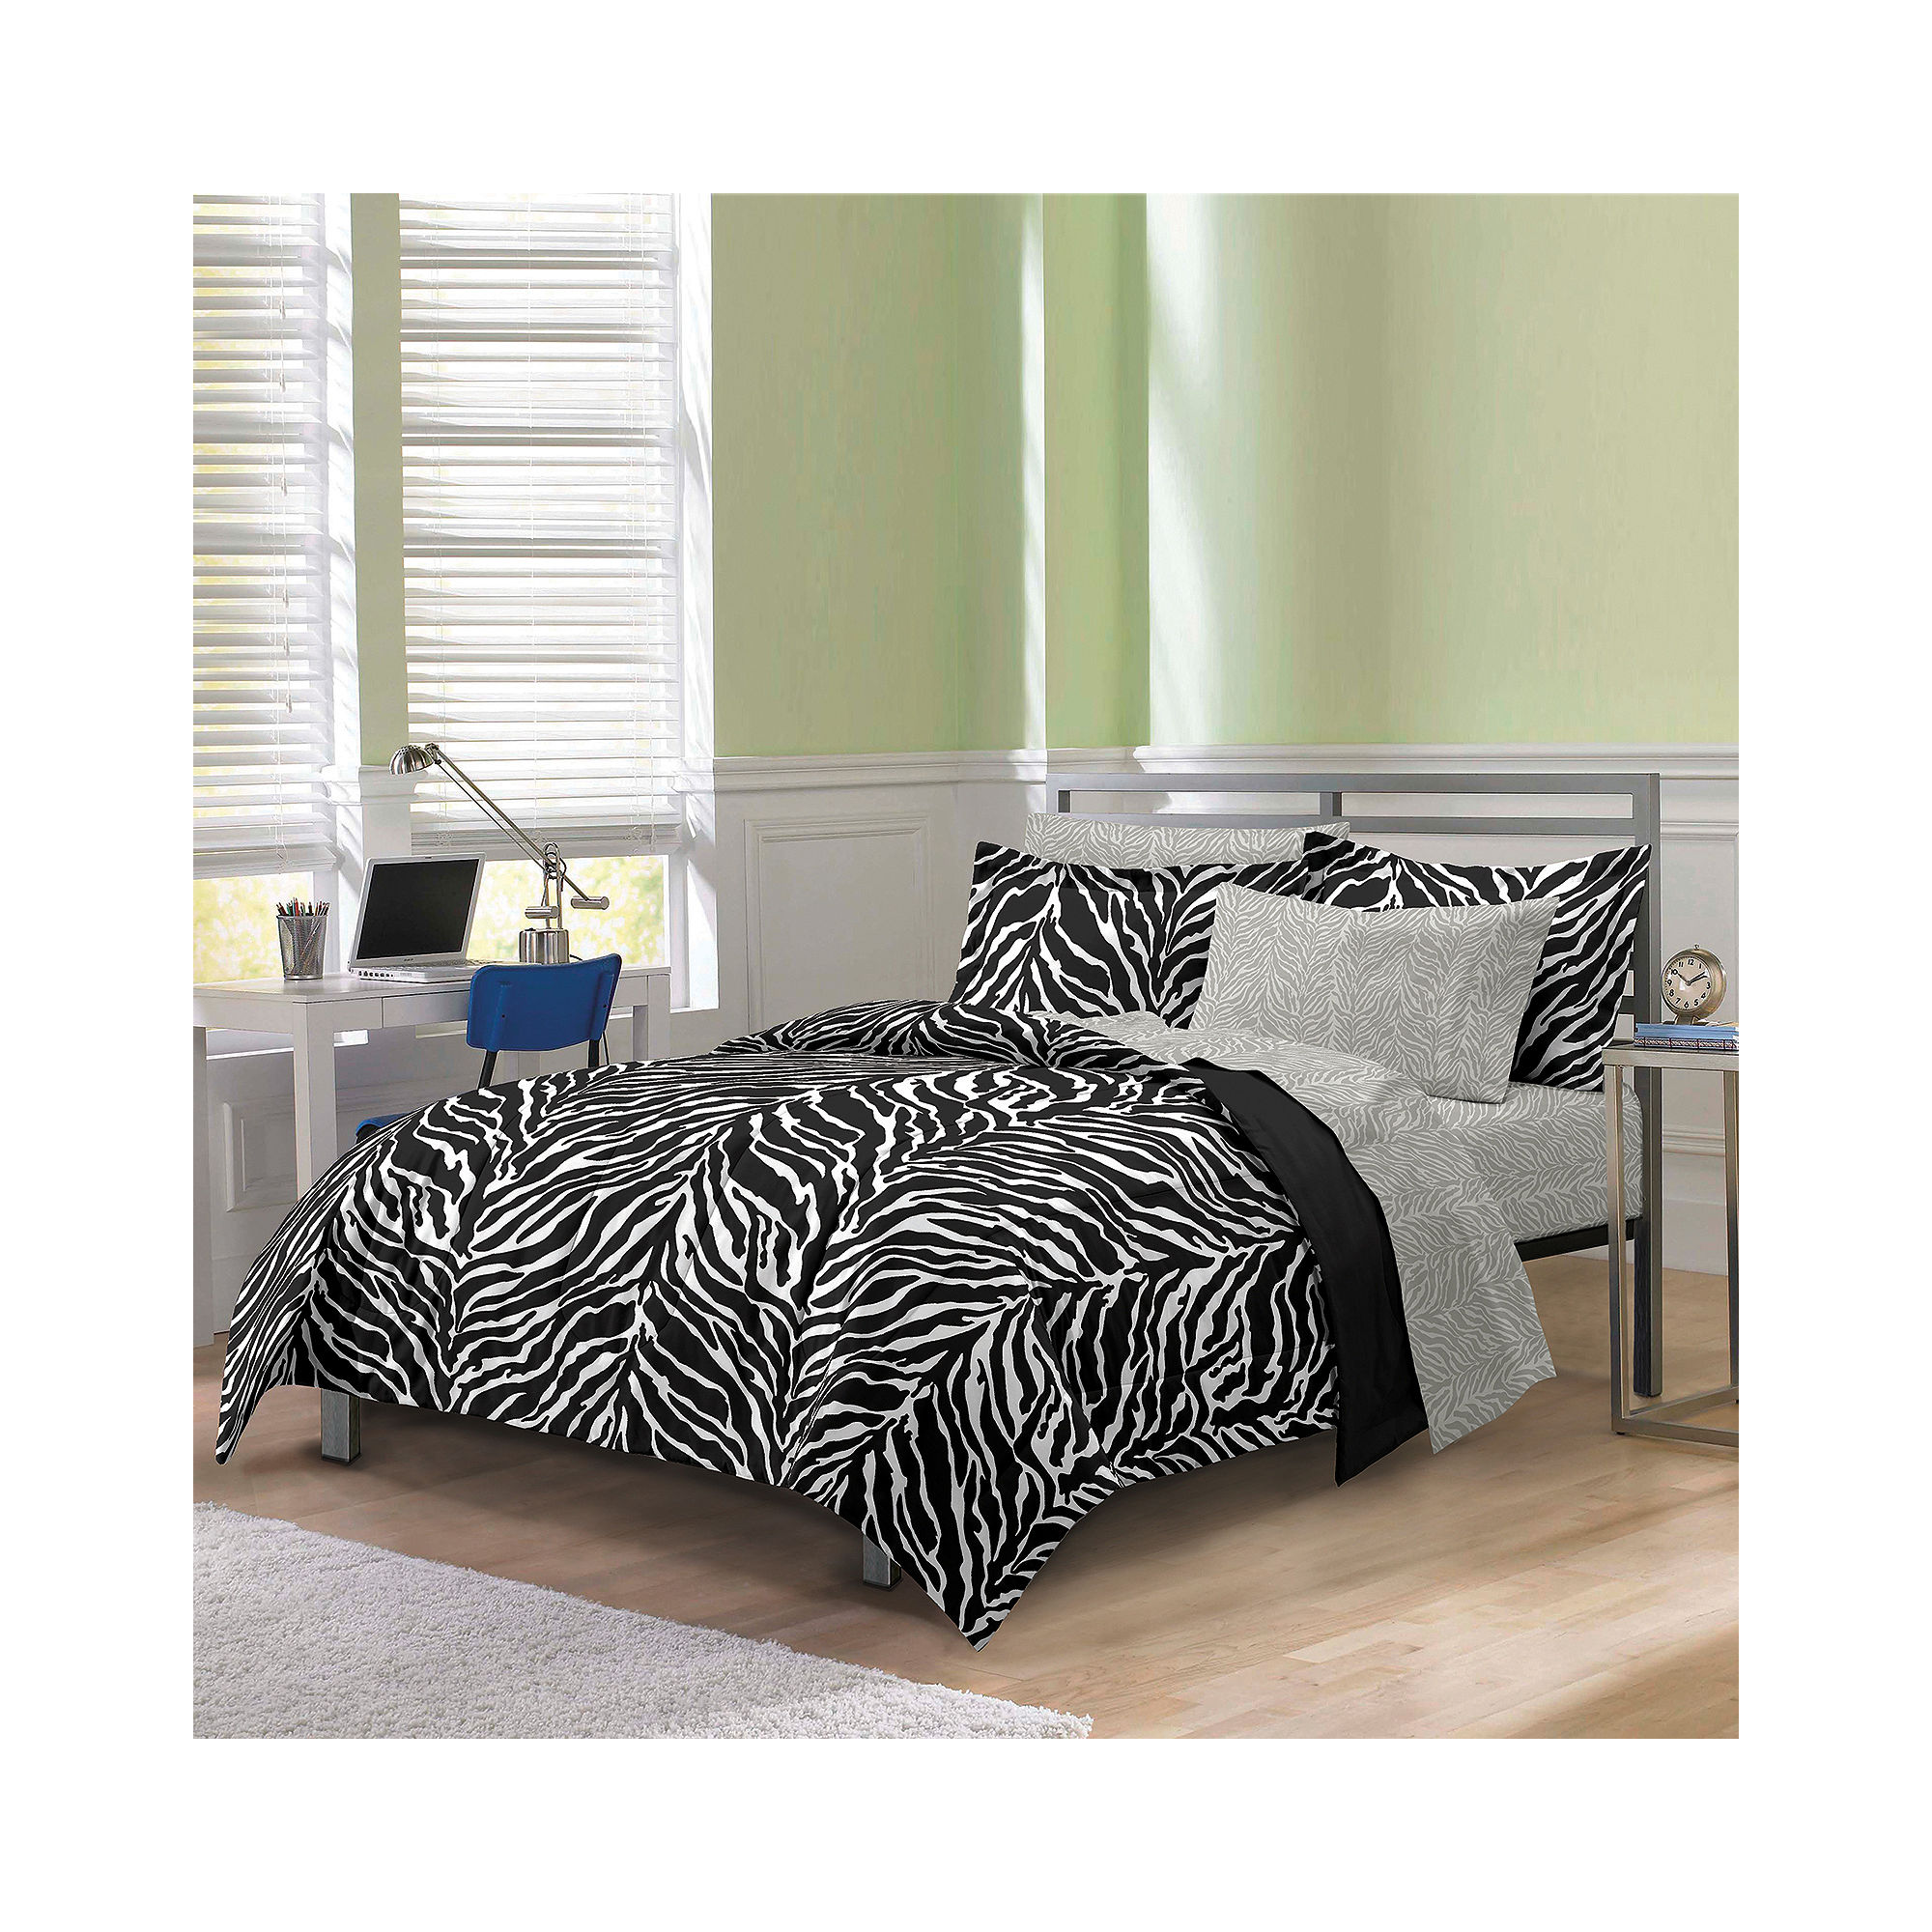 My Room Zebra Complete Bedding Set with Sheets